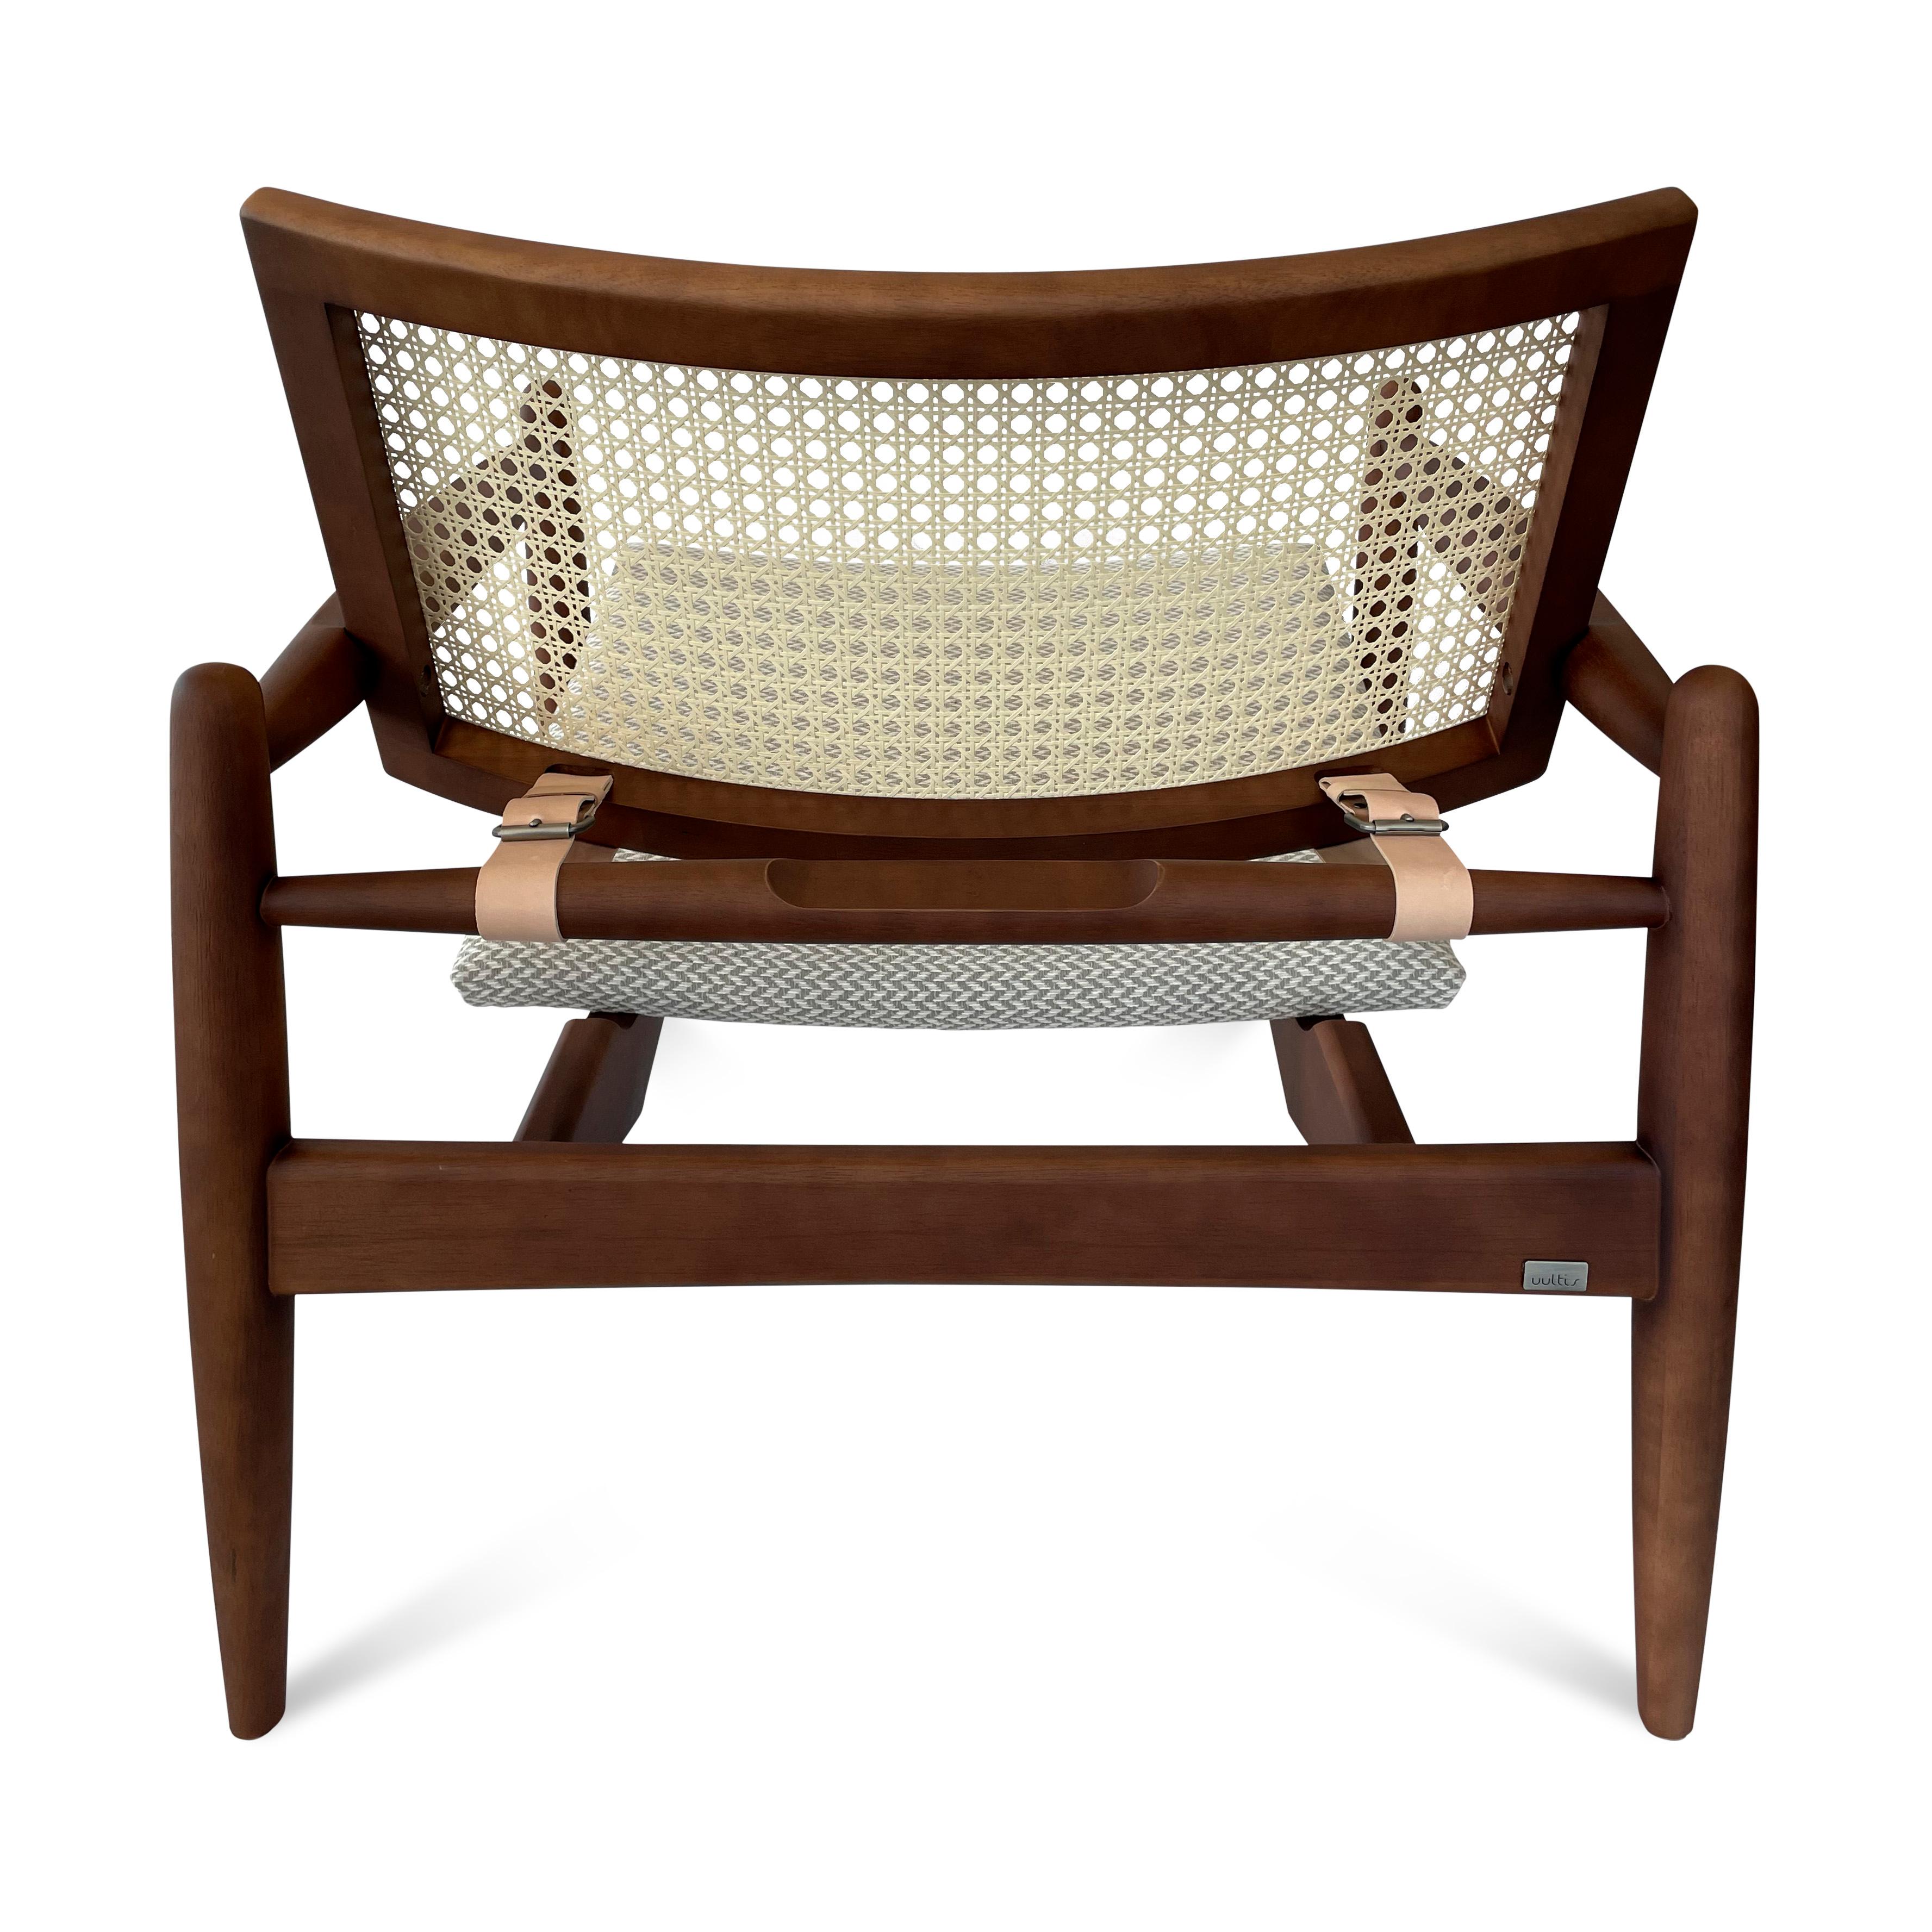 Soho Curved Cane-Back Chair in Walnut Wood with Herringbone Fabric Chair Seat For Sale 2